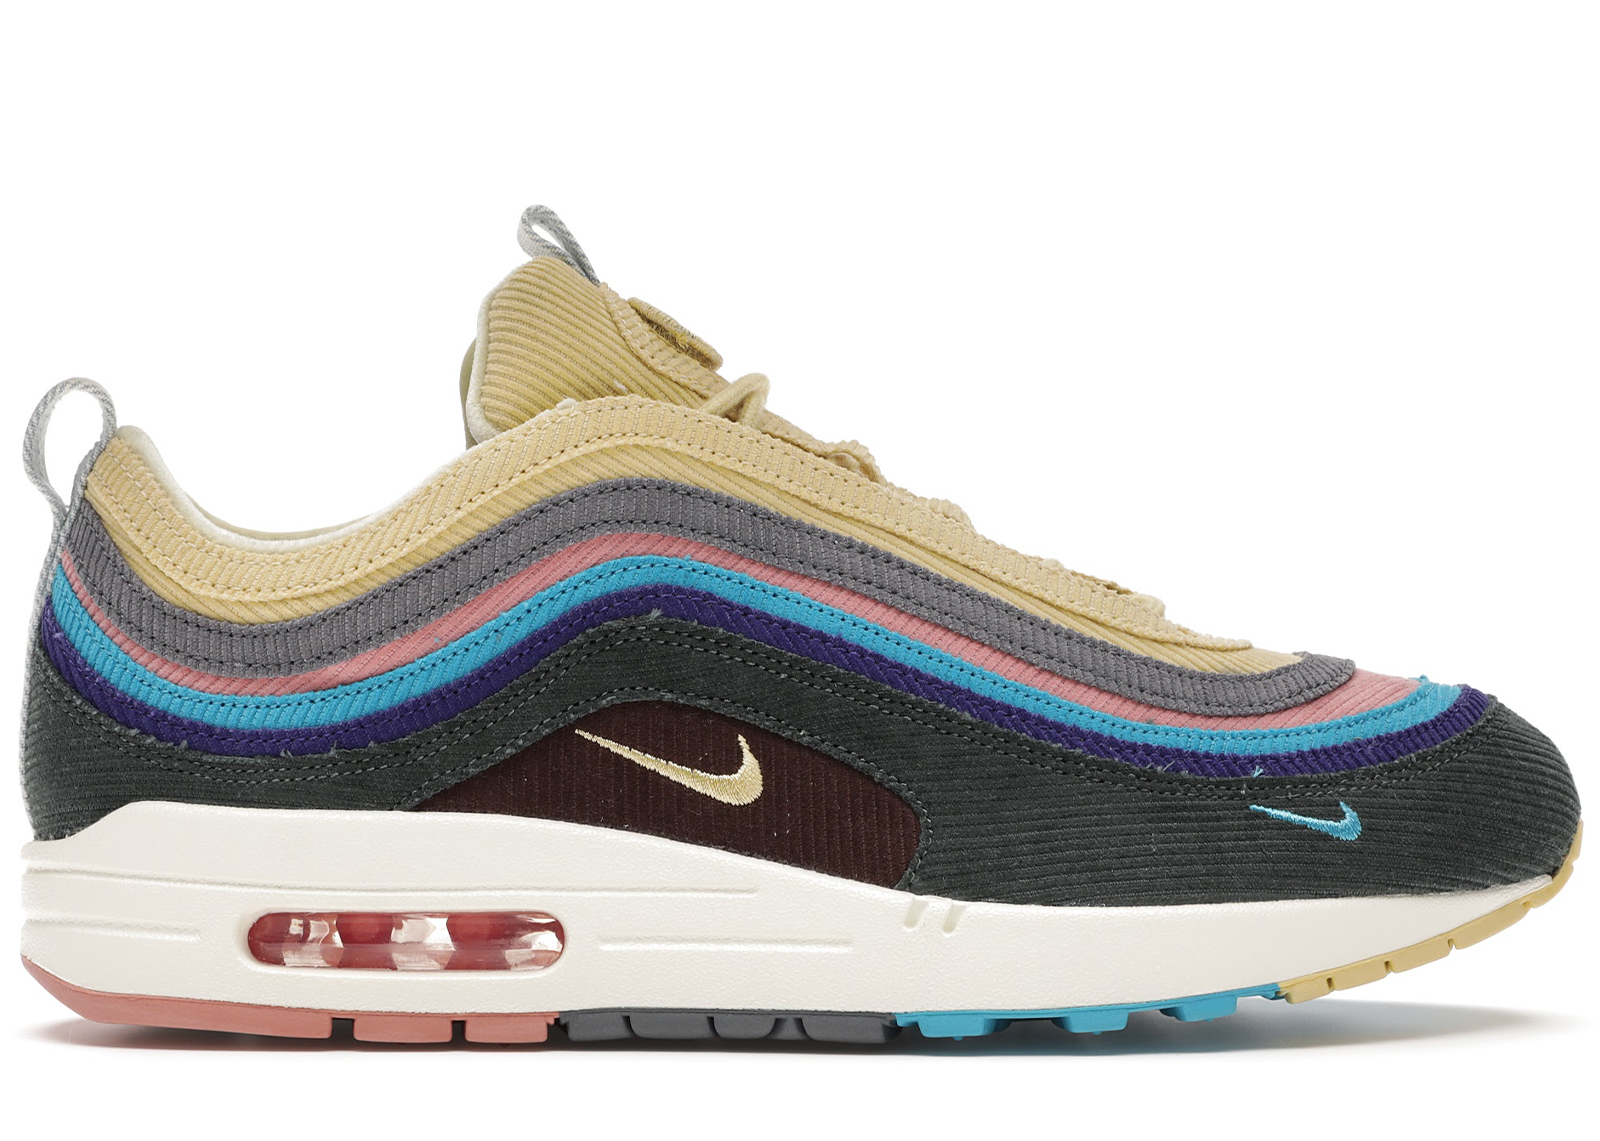 Nike Air Max 1/97 Sean Wotherspoon (All Accessories and Dustbag 